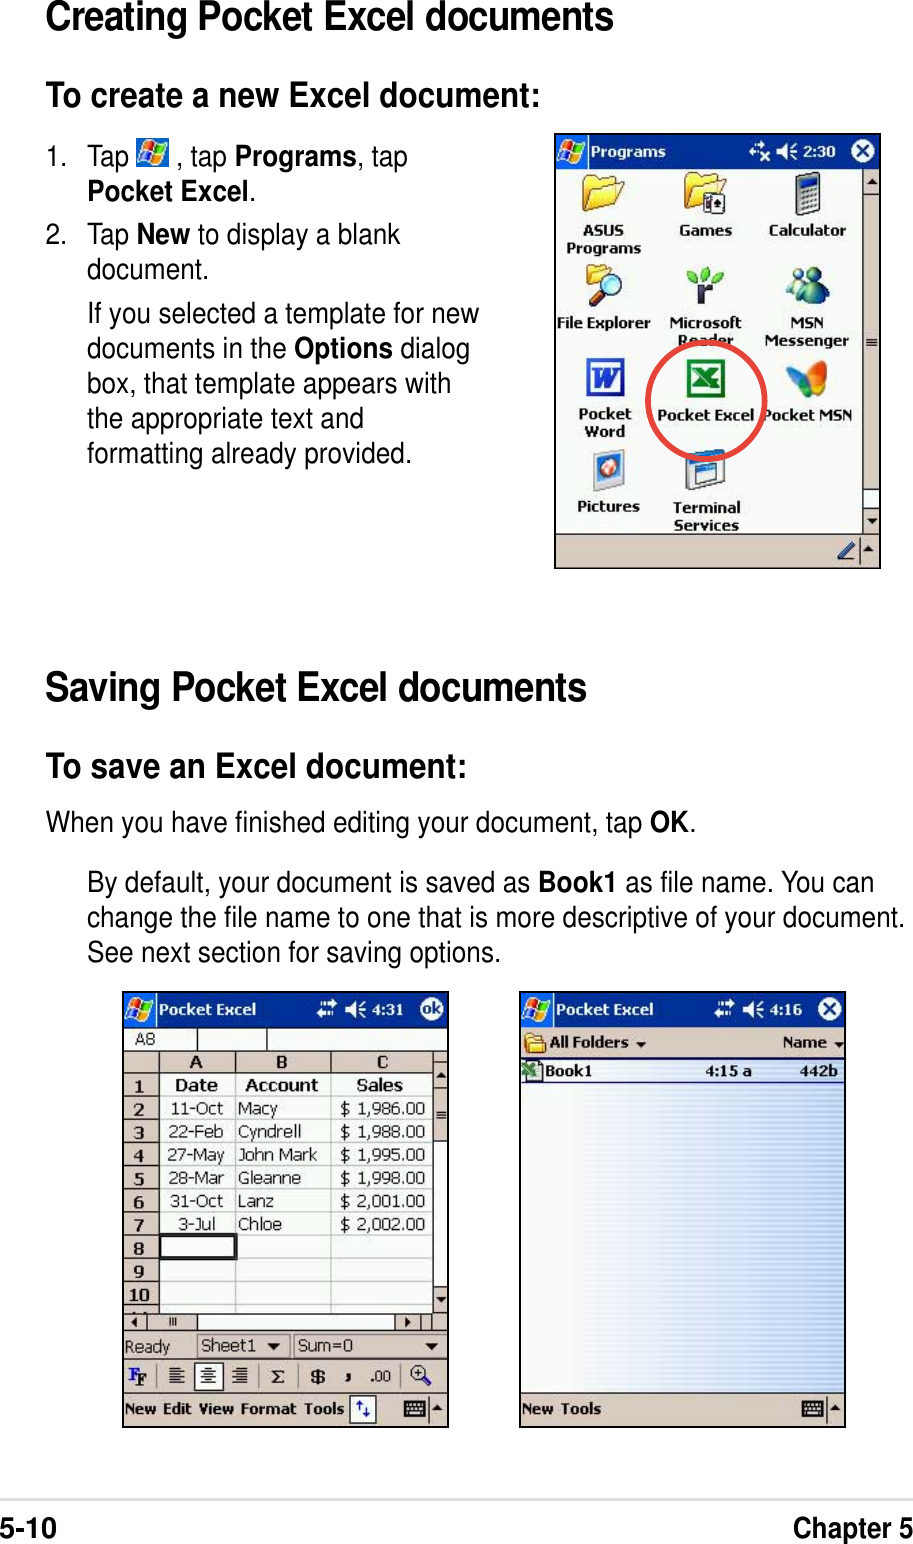 5-10Chapter 5Saving Pocket Excel documentsTo save an Excel document:When you have finished editing your document, tap OK.By default, your document is saved as Book1 as file name. You canchange the file name to one that is more descriptive of your document.See next section for saving options.1. Tap   , tap Programs, tapPocket Excel.2. Tap New to display a blankdocument.If you selected a template for newdocuments in the Options dialogbox, that template appears withthe appropriate text andformatting already provided.Creating Pocket Excel documentsTo create a new Excel document: